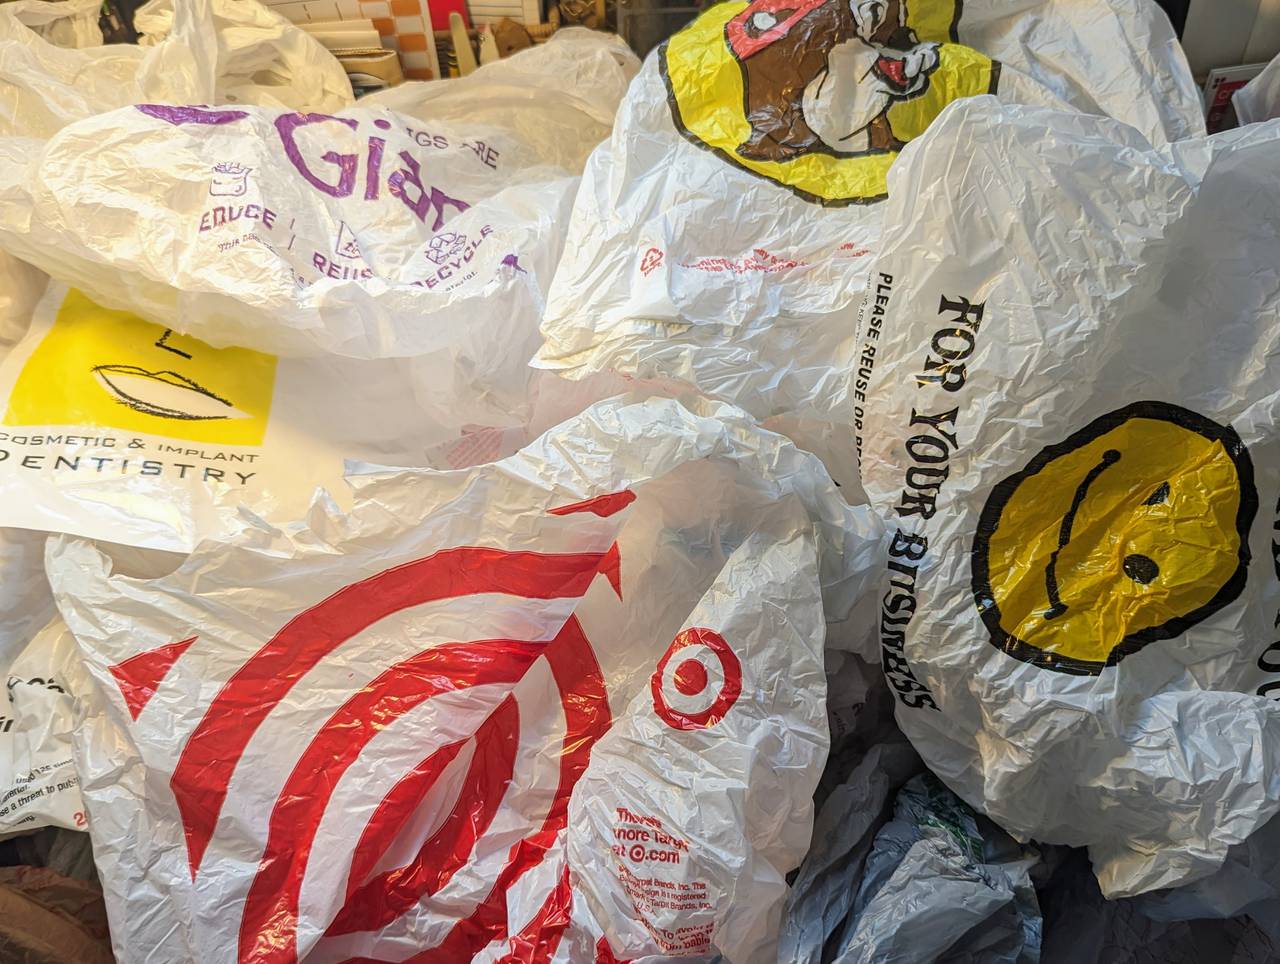 I checked under my kitchen sink, and in my wife's stash. I counted more than 50 plastic bags, including one from Buc-ee's - a convenience store more than 400 miles away from Annapolis.